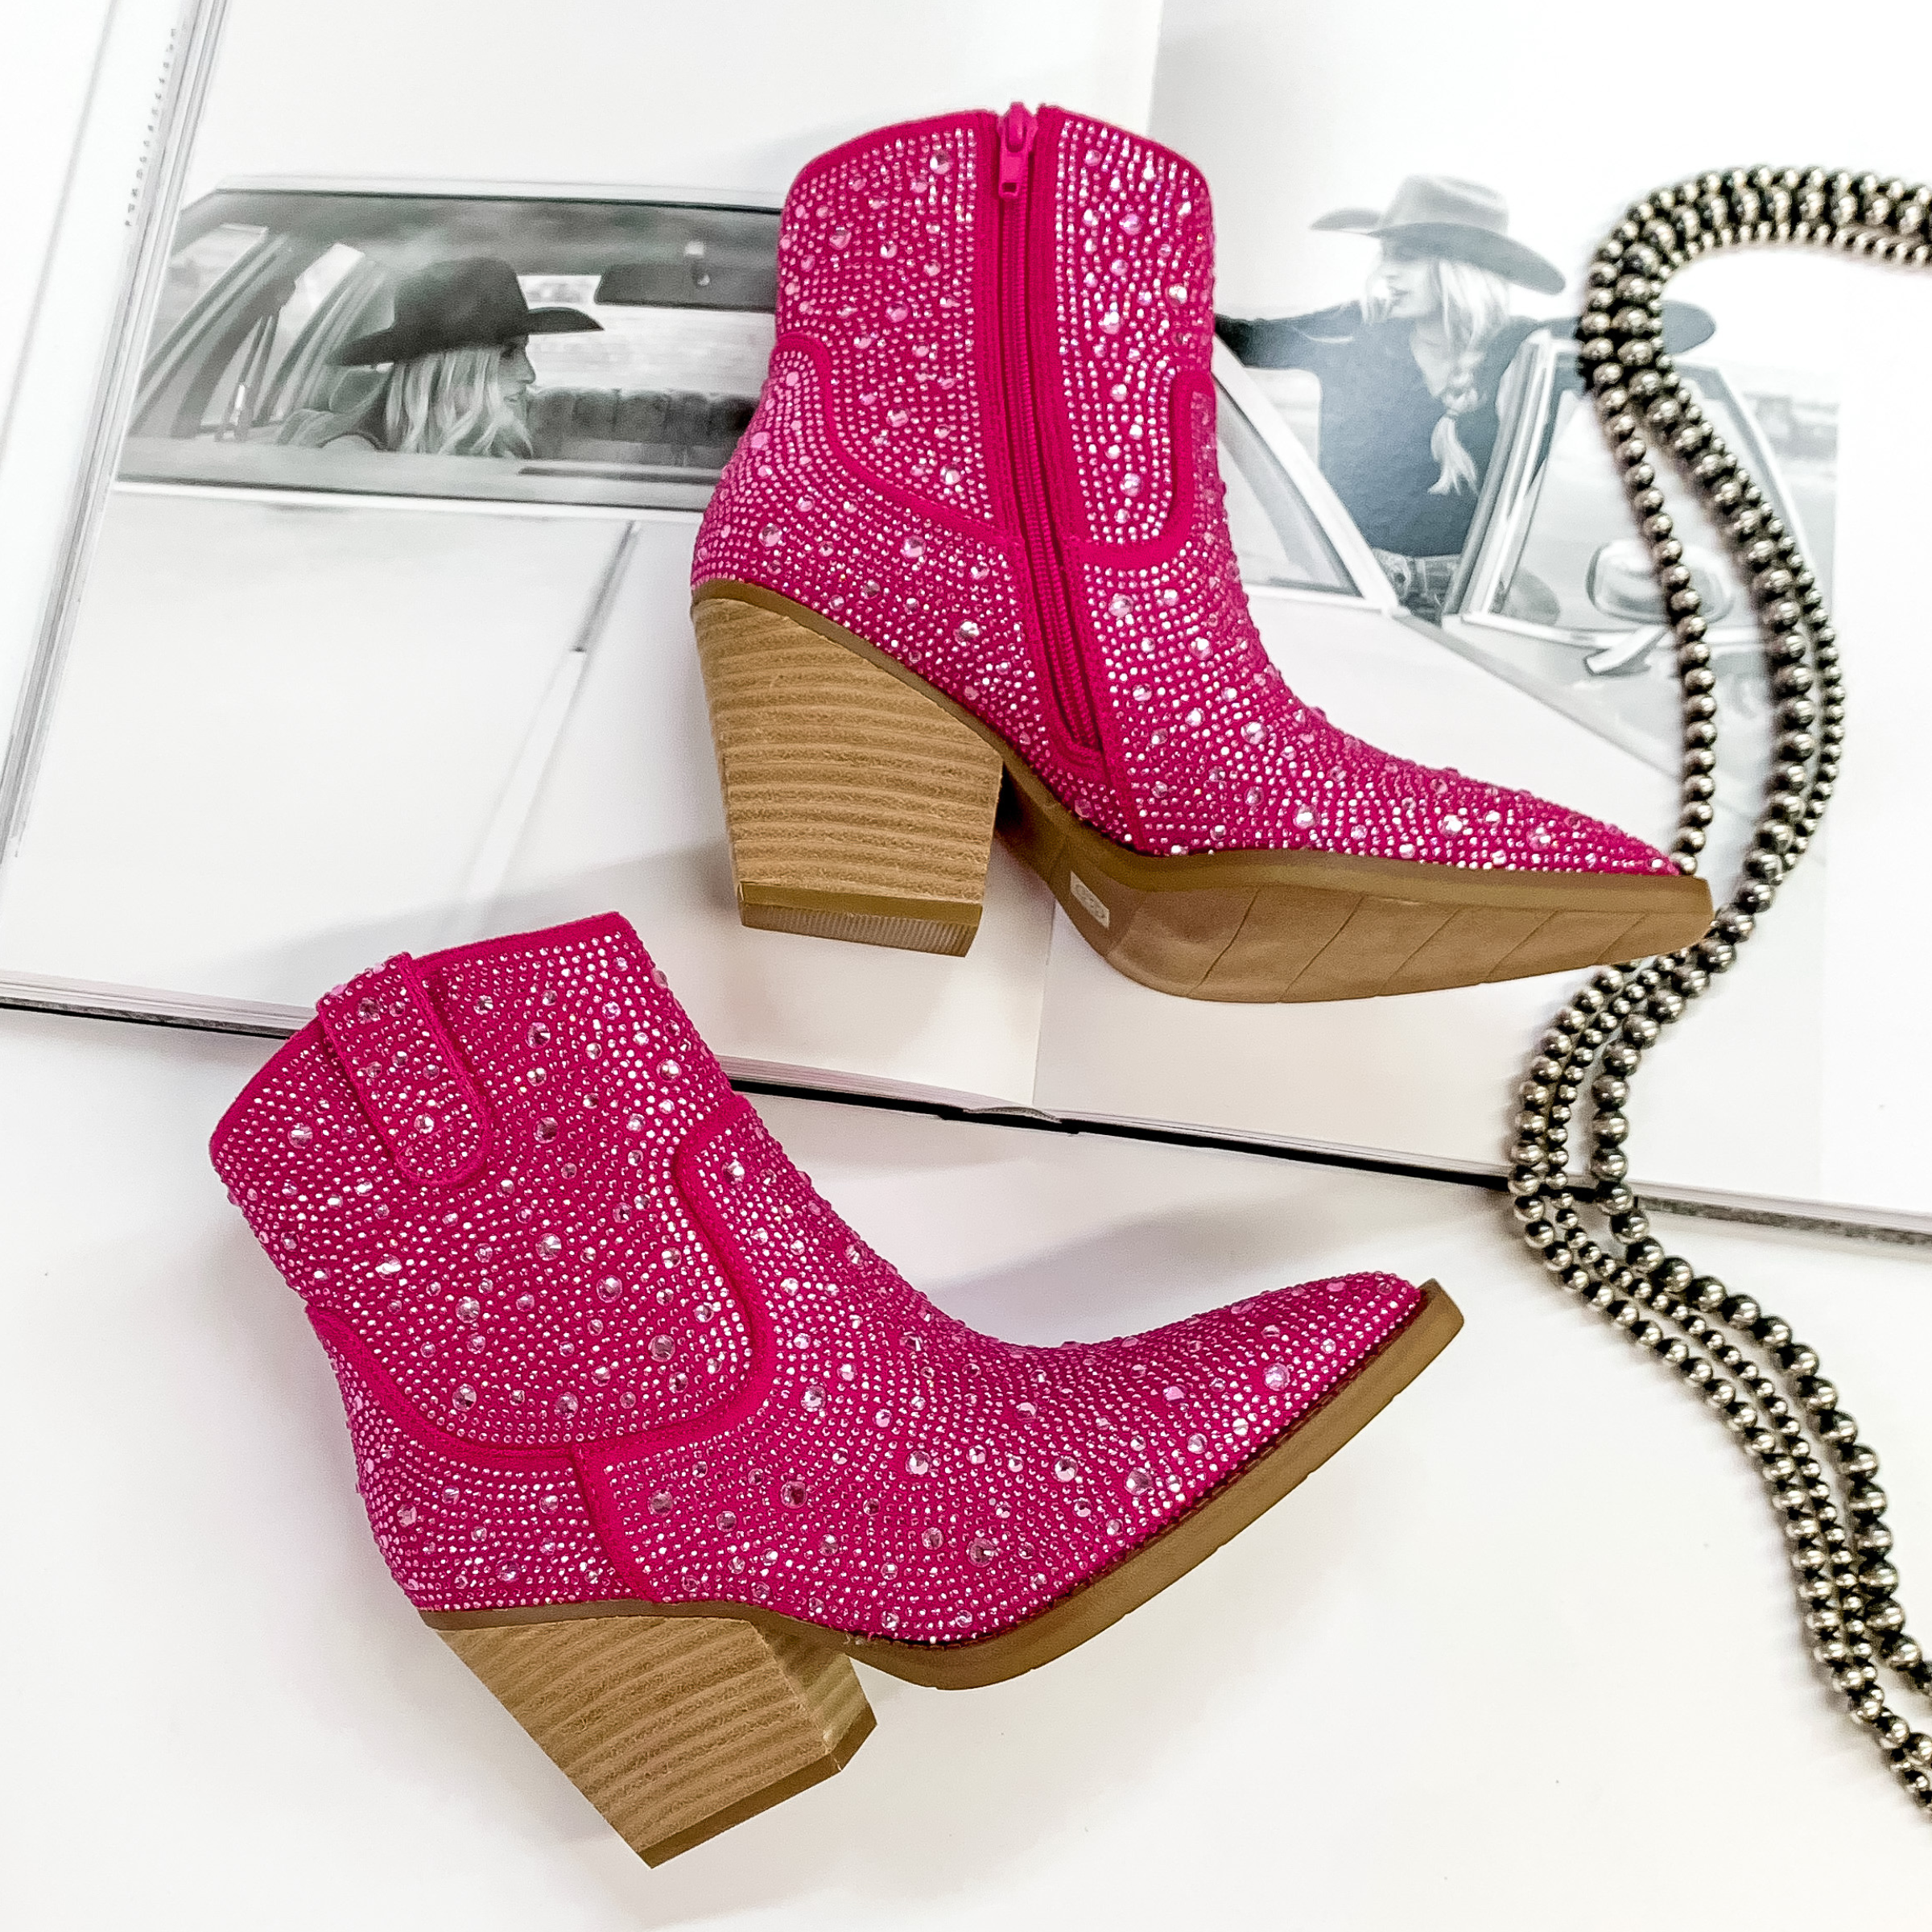 Very G | Kady Rhinestone Cowboy Booties in Pink - Giddy Up Glamour Boutique